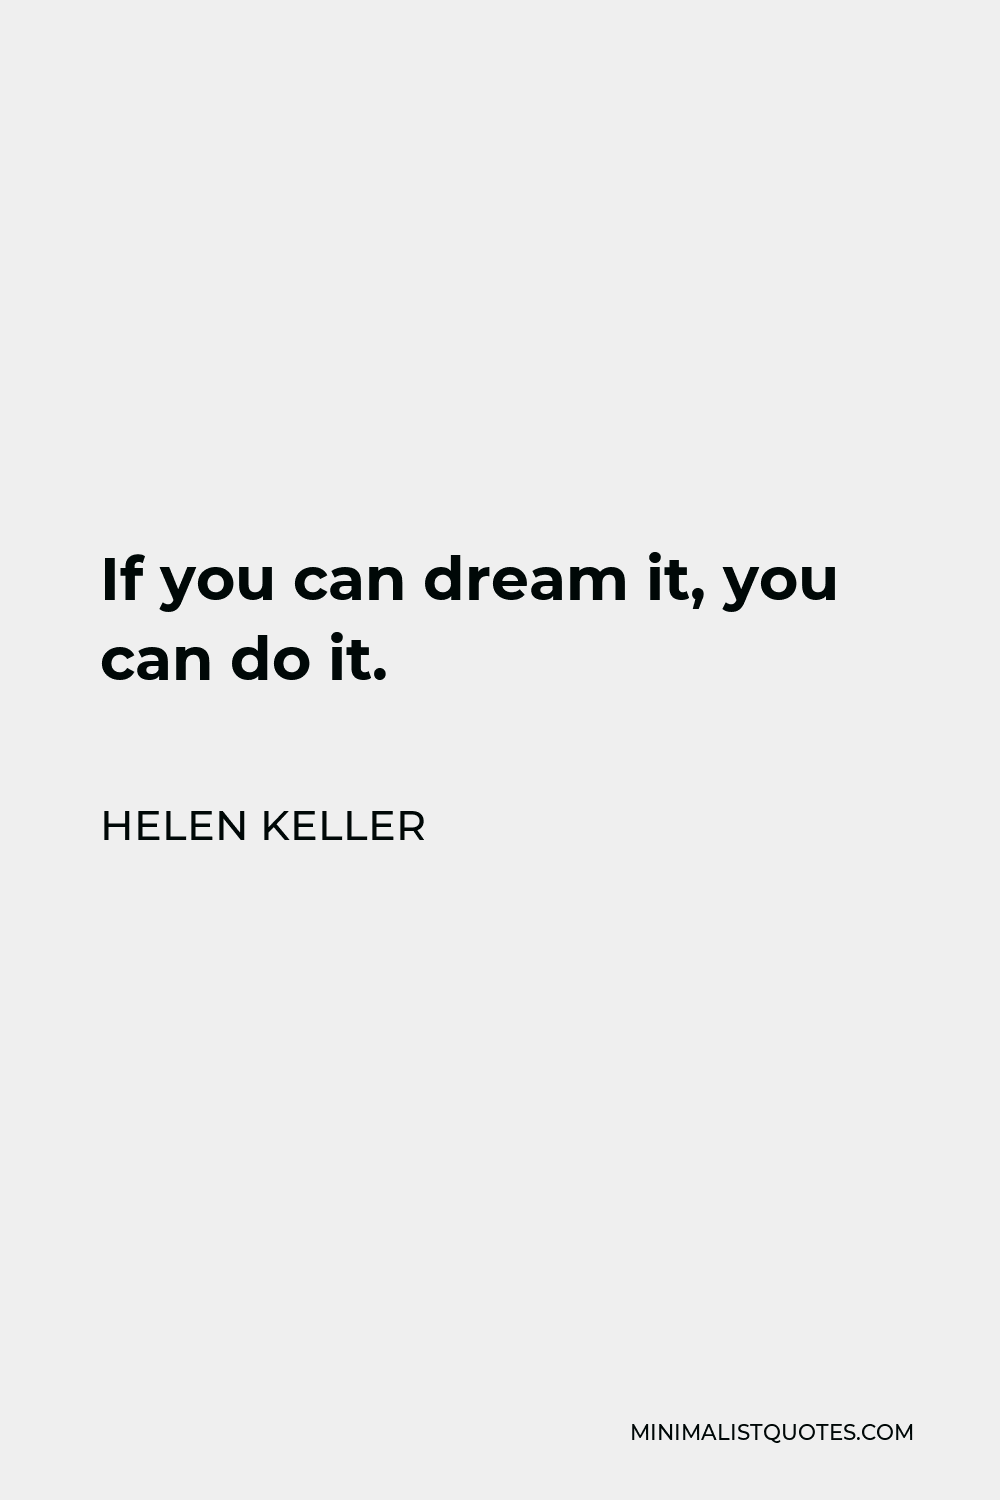 Helen Keller Quote - If you can dream it, you can do it.